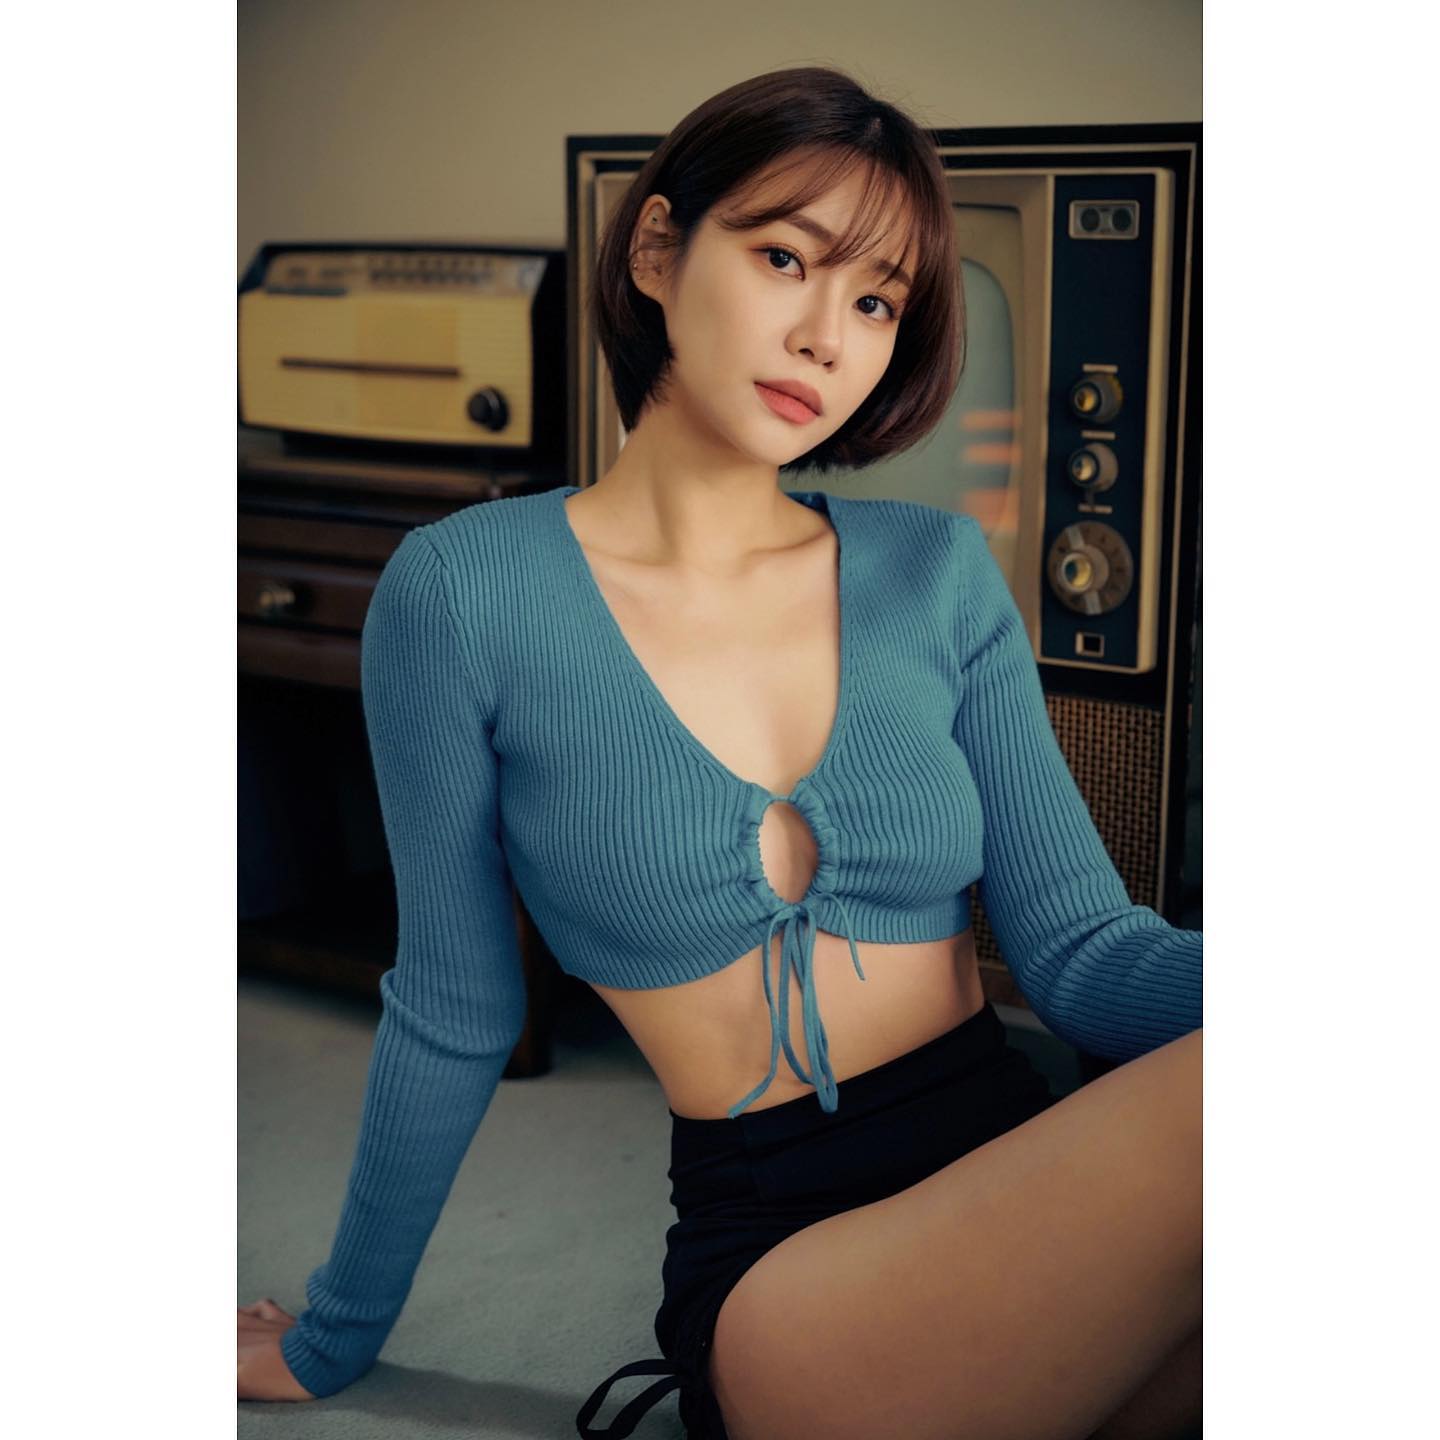 Yuna, ‘Yoga Teacher’ after leaving AOA… Excessive exposure in underwear